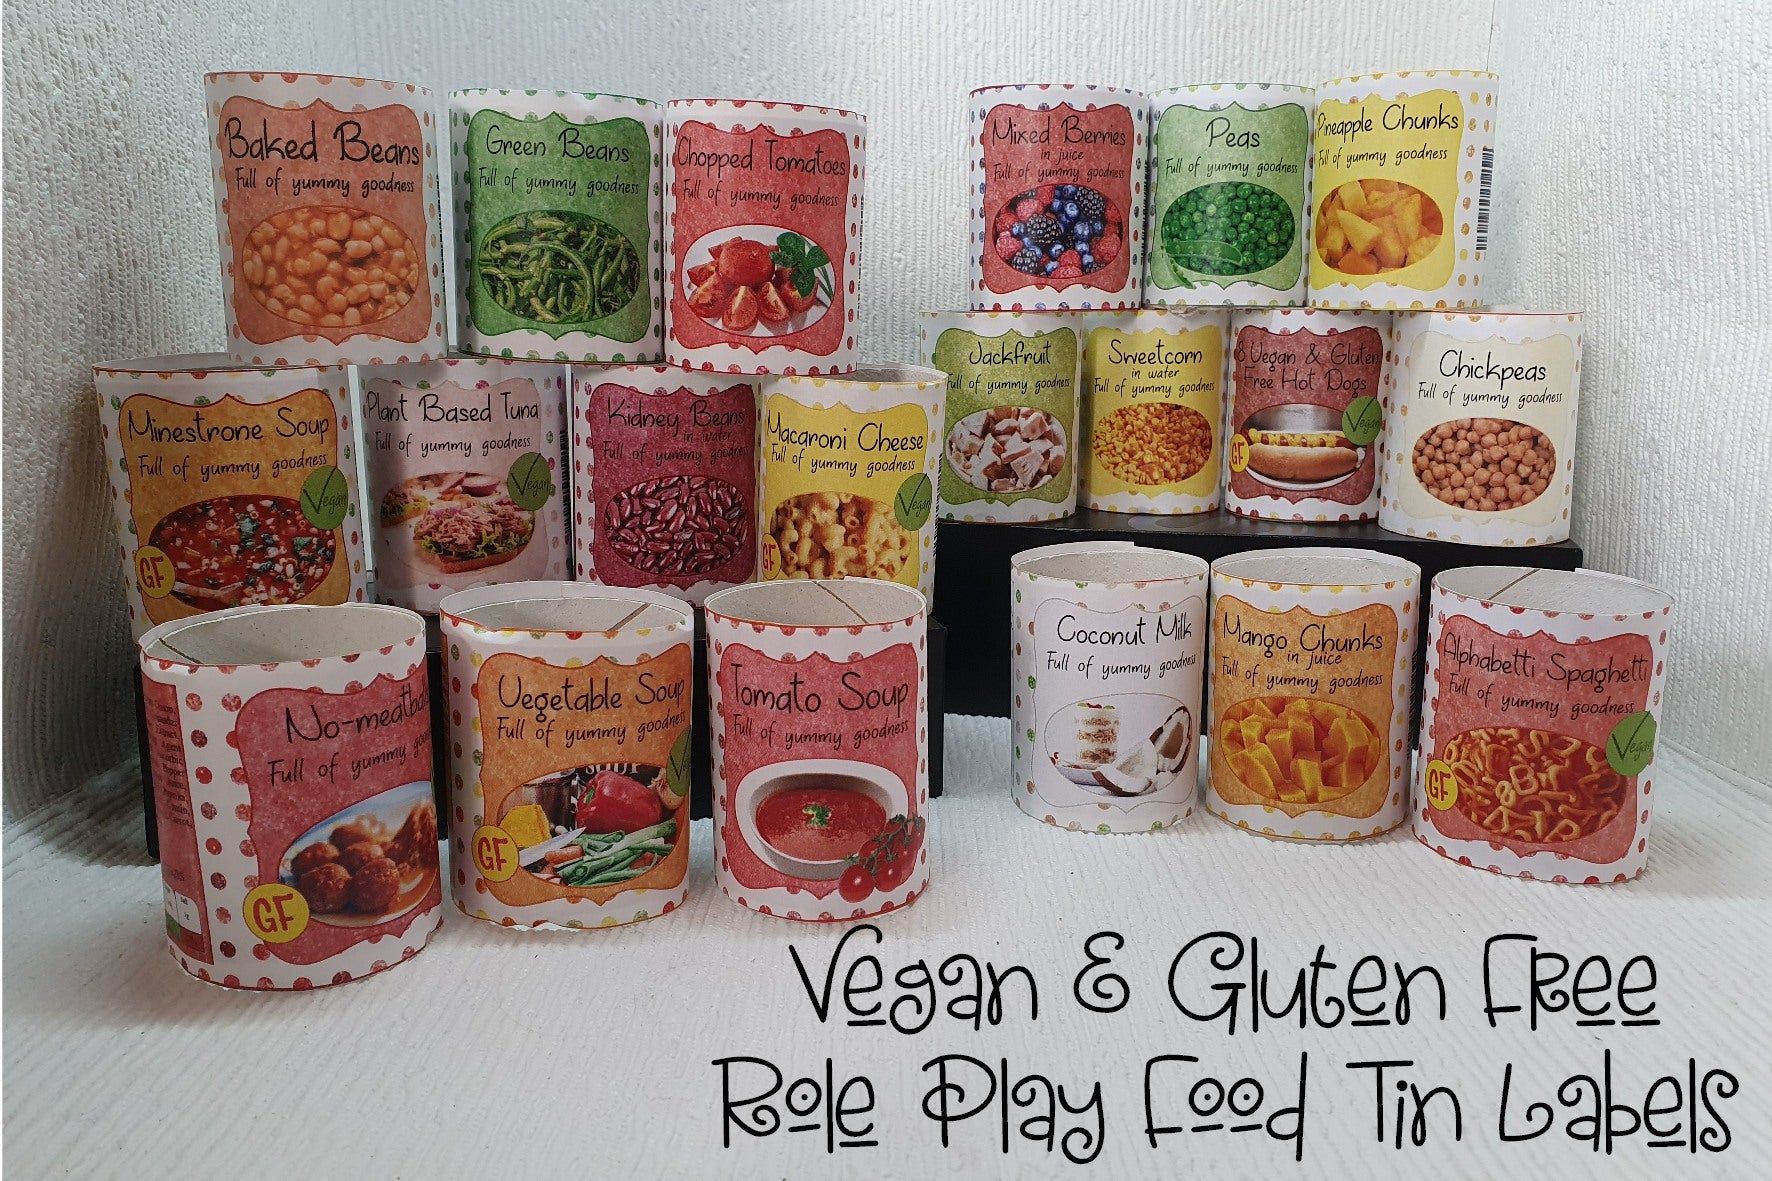 Vegan & Gluten Free Tinned Food Labels For Role Play Part 1